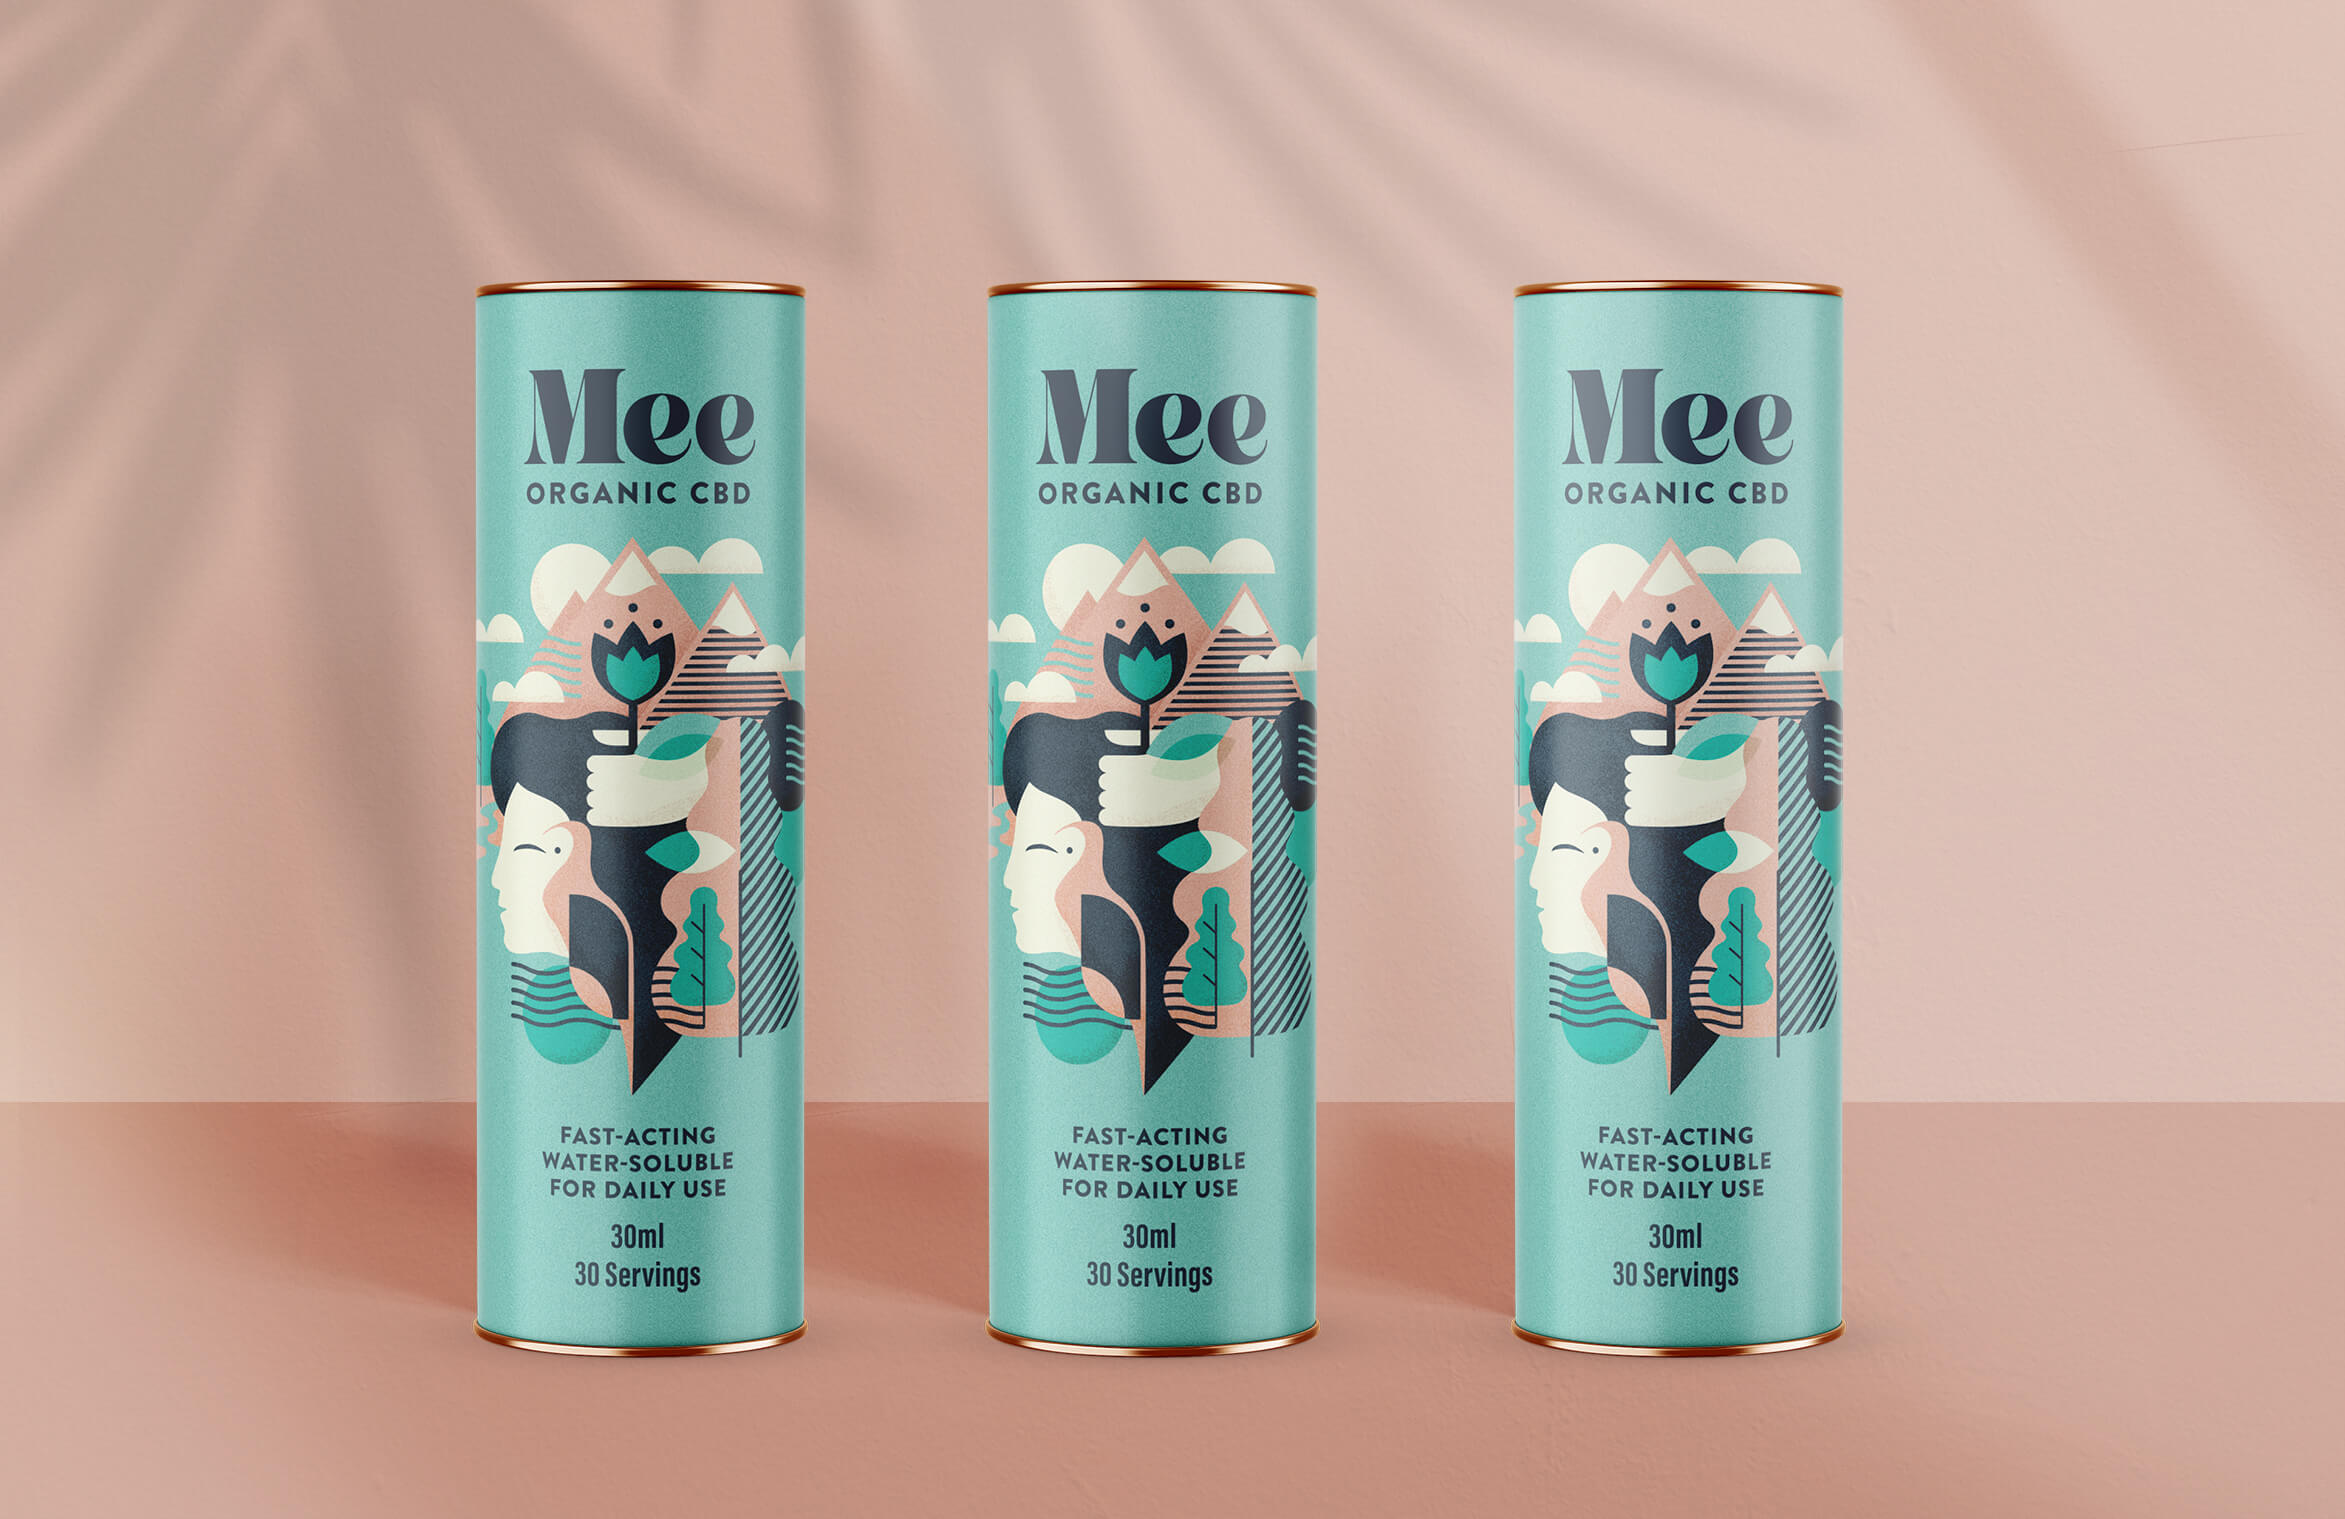 The Space Creative Brings CBD to the Mainstream with the Launch of Mee